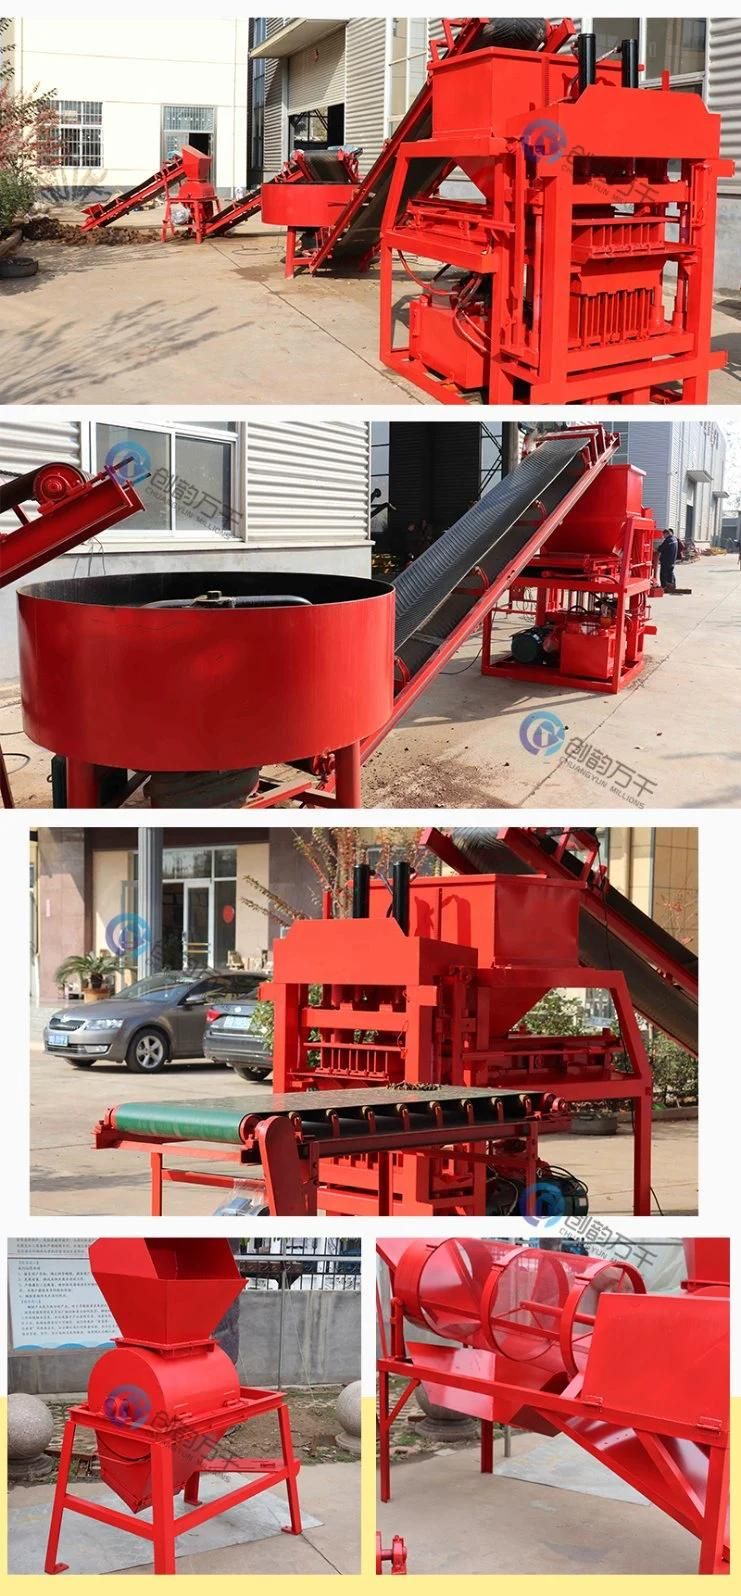 Cy4-10 Automatic Clay Interlocking Brick Making Machine with Hydraulic System for Sale